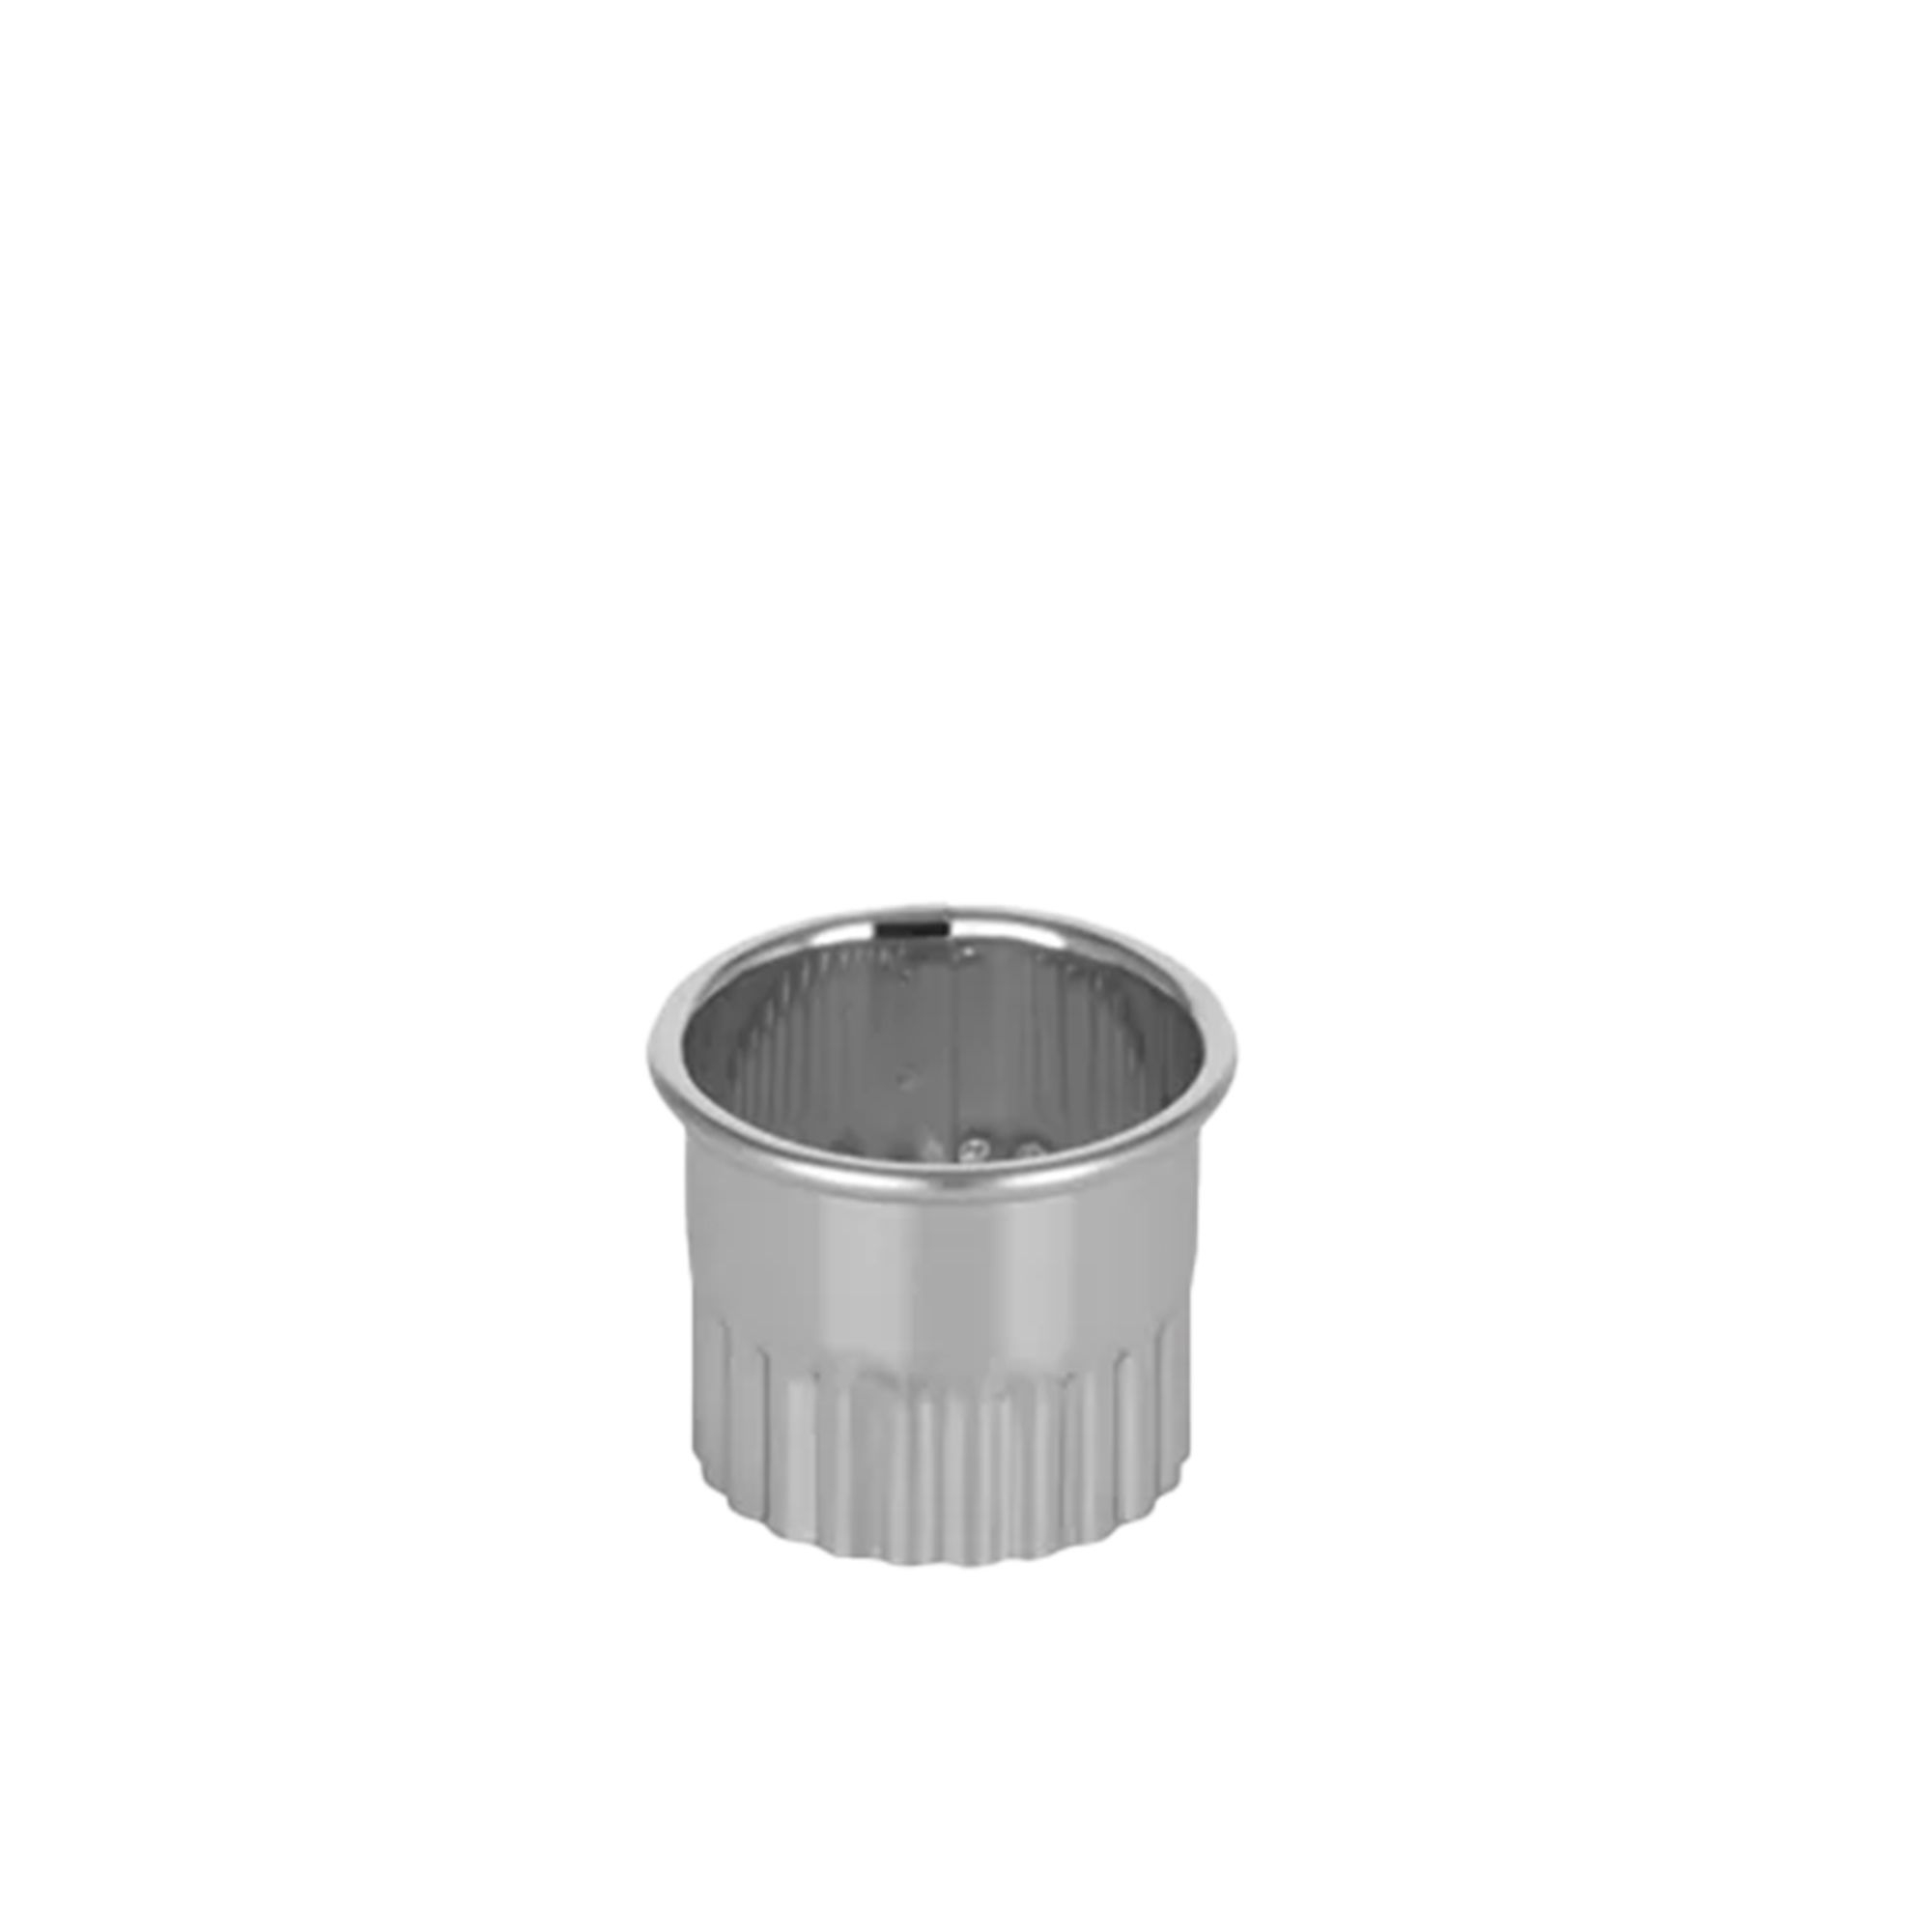 Chef Inox Cutter Crinkled 38mm Image 1